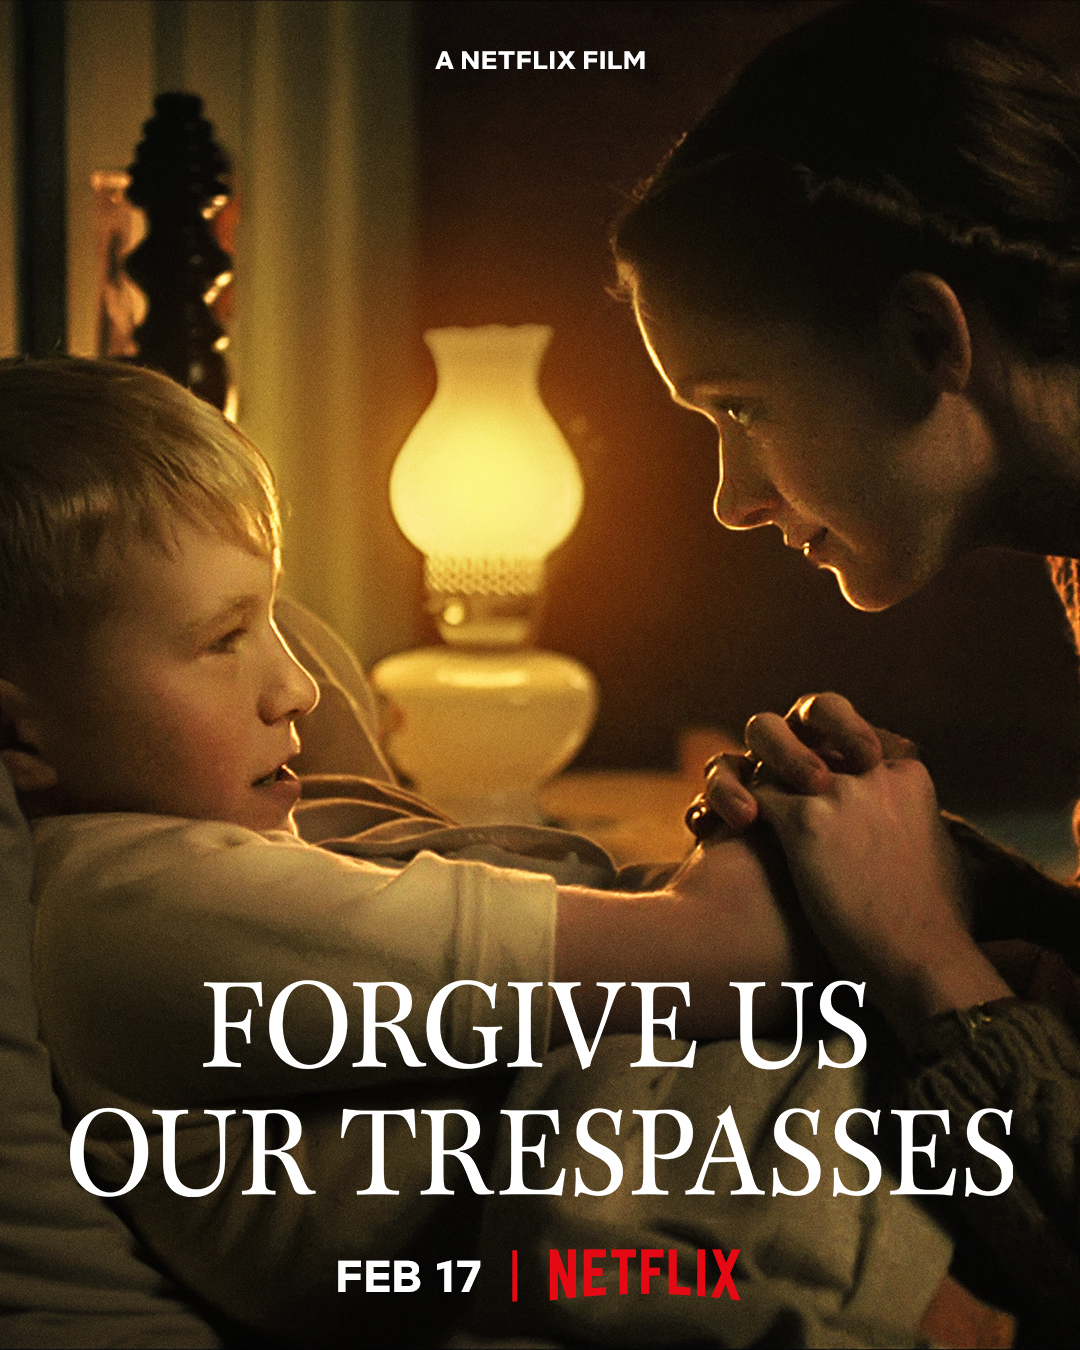 Will Netflix stream the episodes of Forgive Us Our Trespasses (2022)